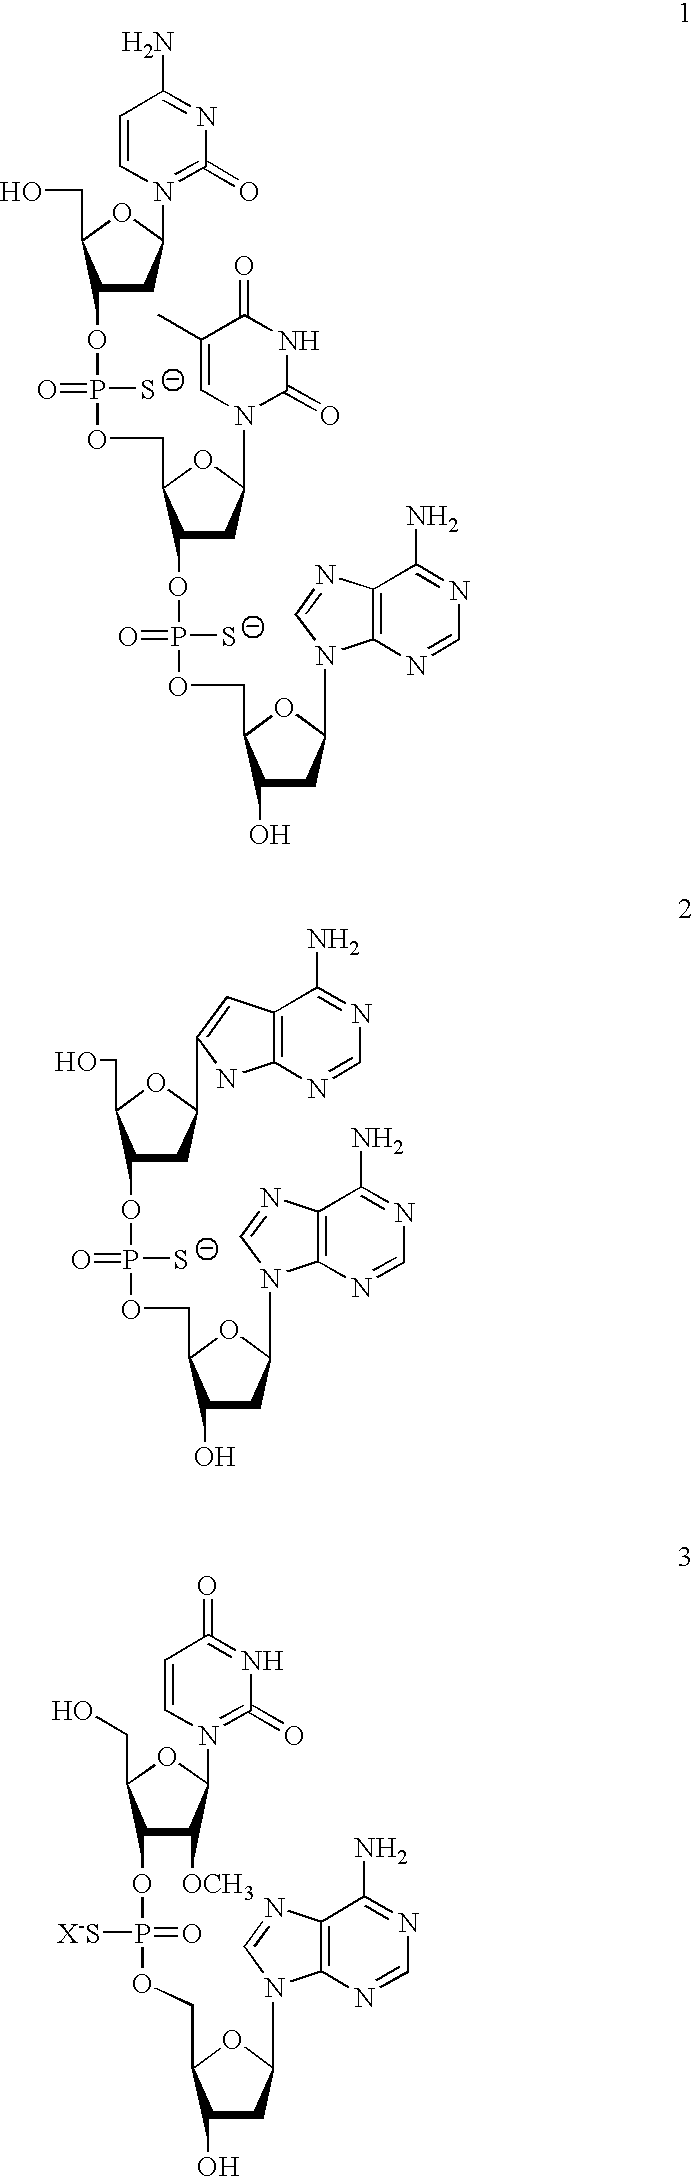 Nucleic acid-based compounds and methods of use thereof